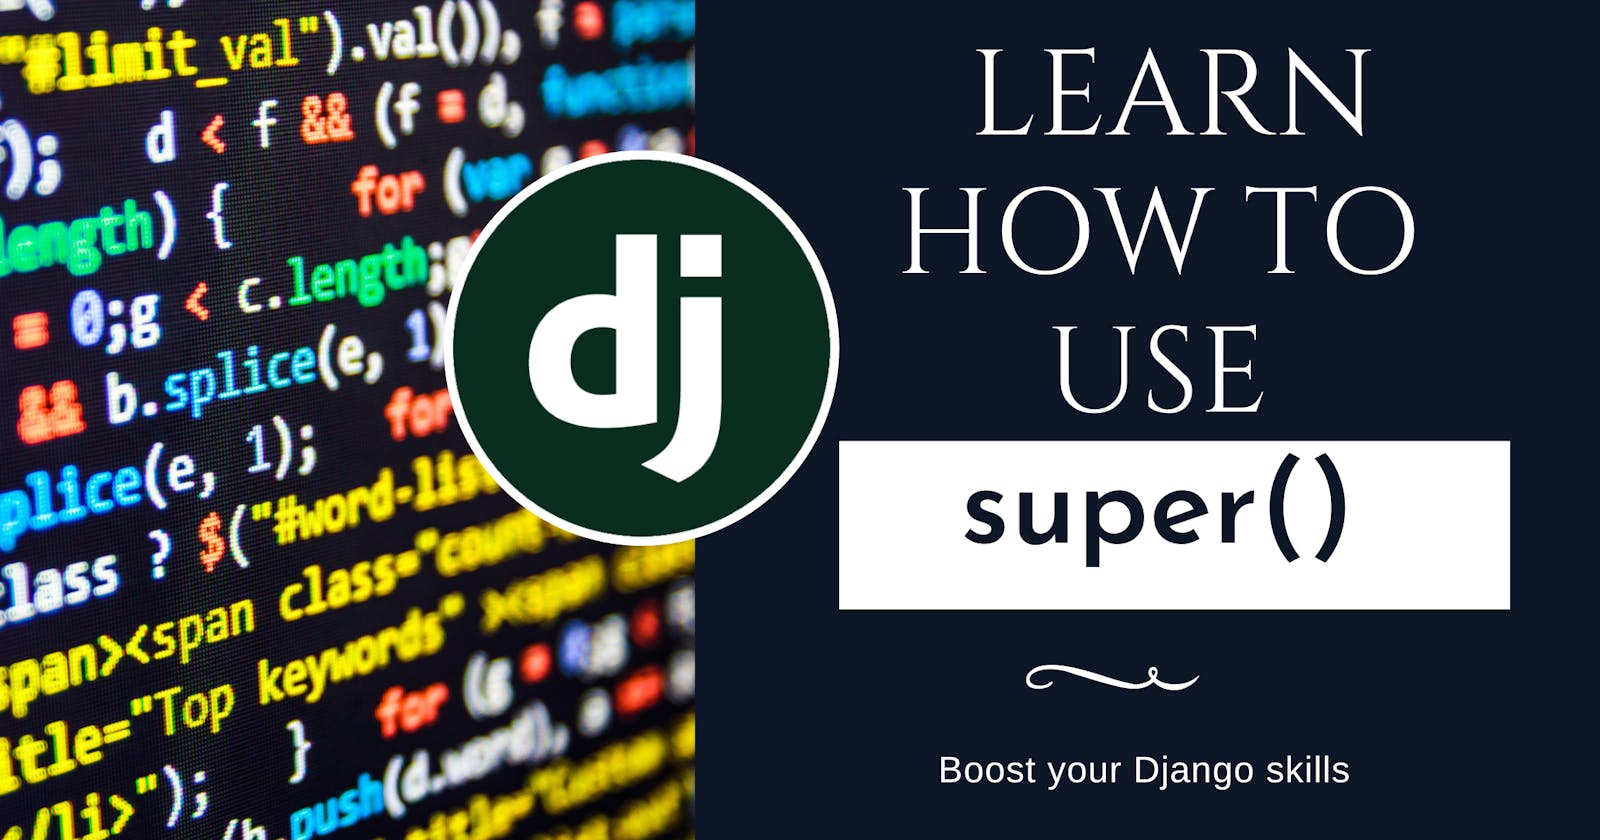 Boost your Django skills: Learn how to use super()